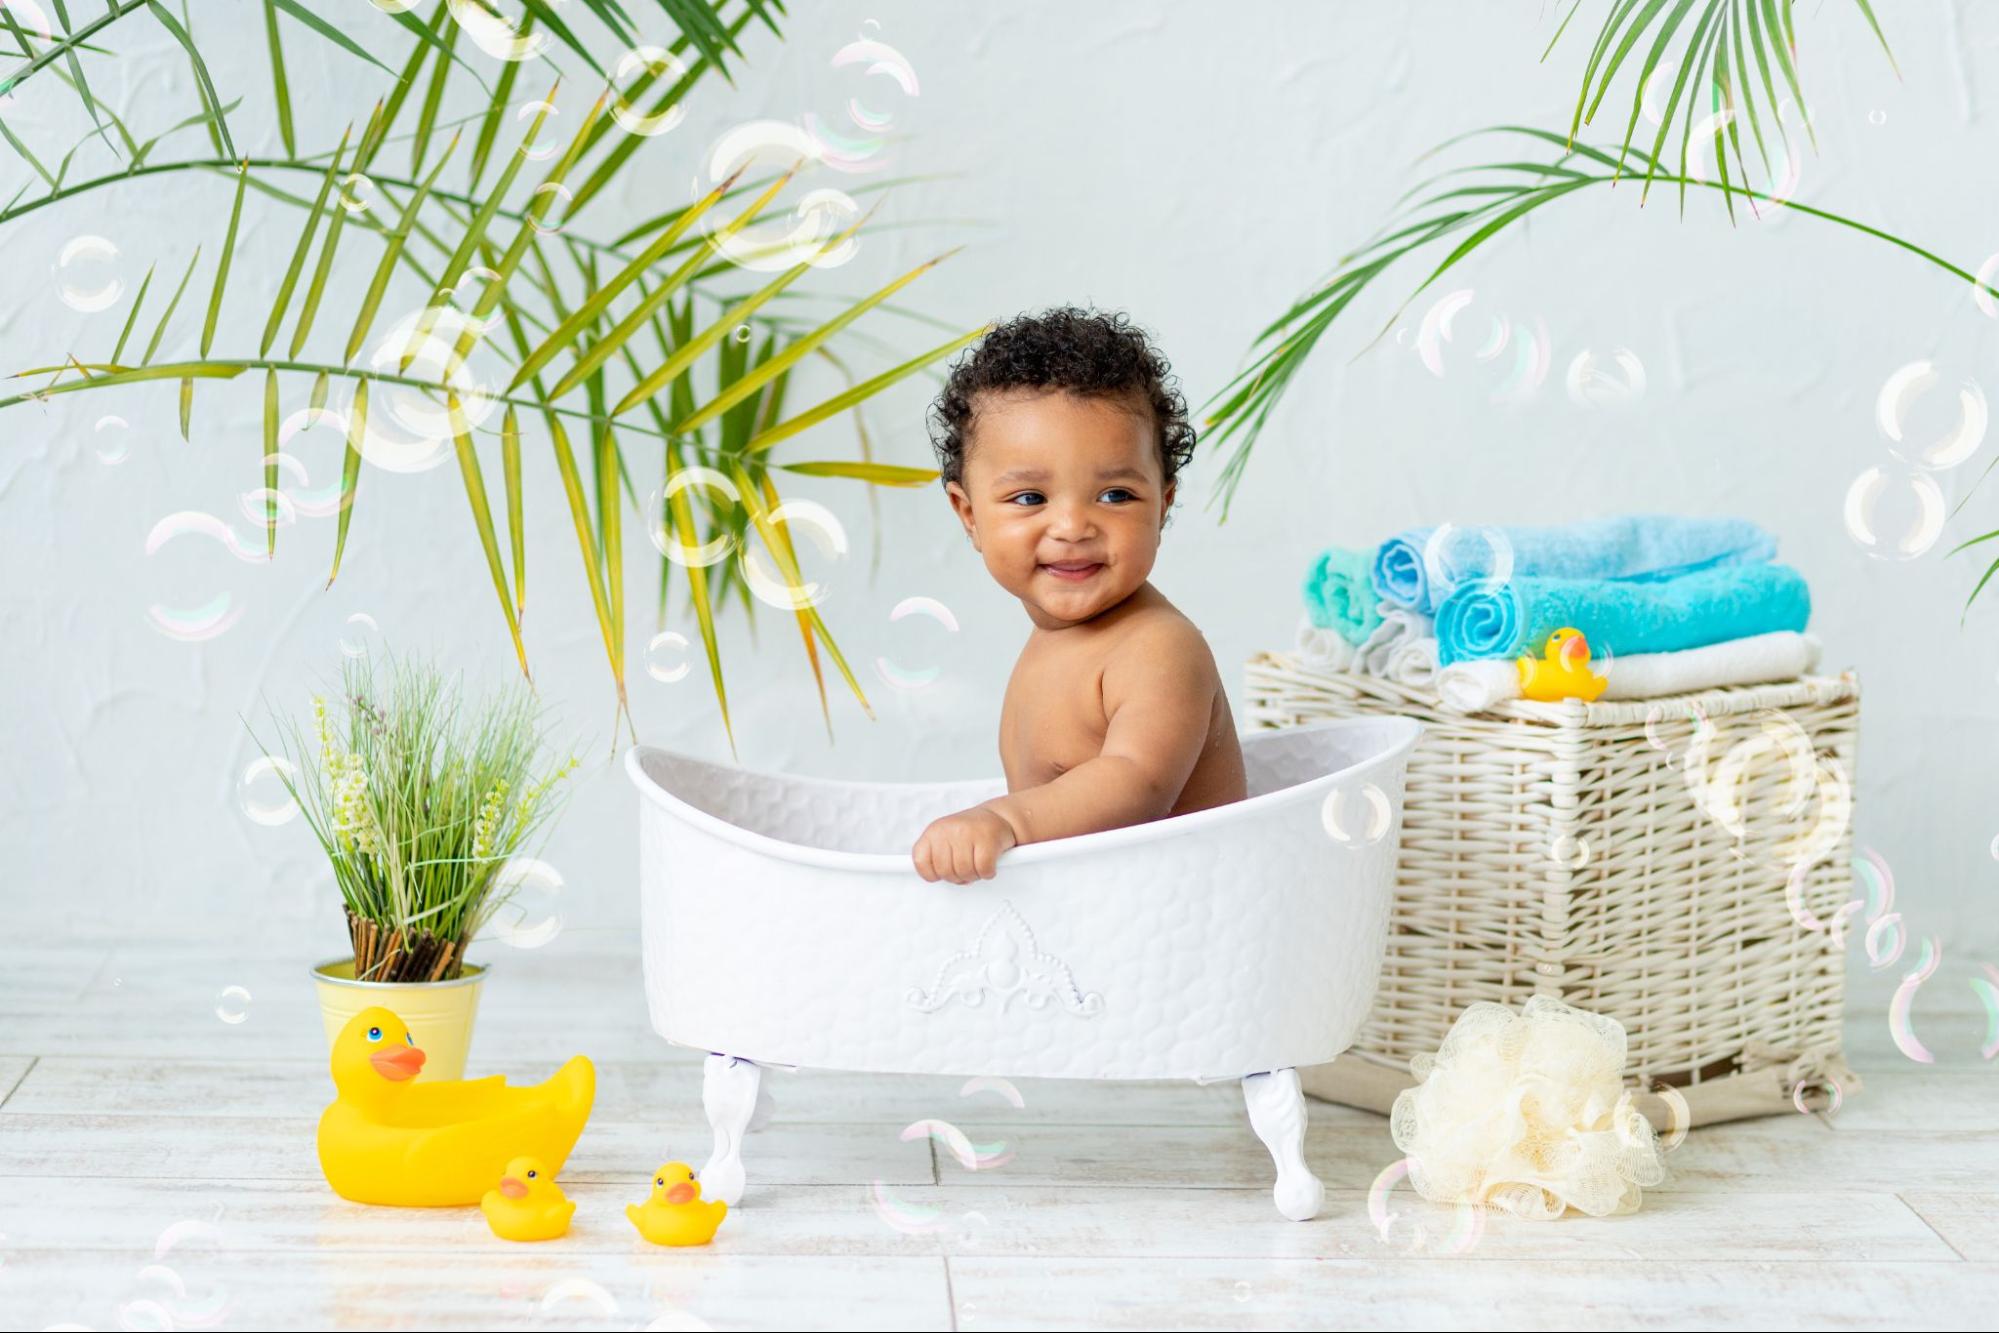 Bathtime bliss: Cute 6-Month Baby's Playful At-Home Photoshoot